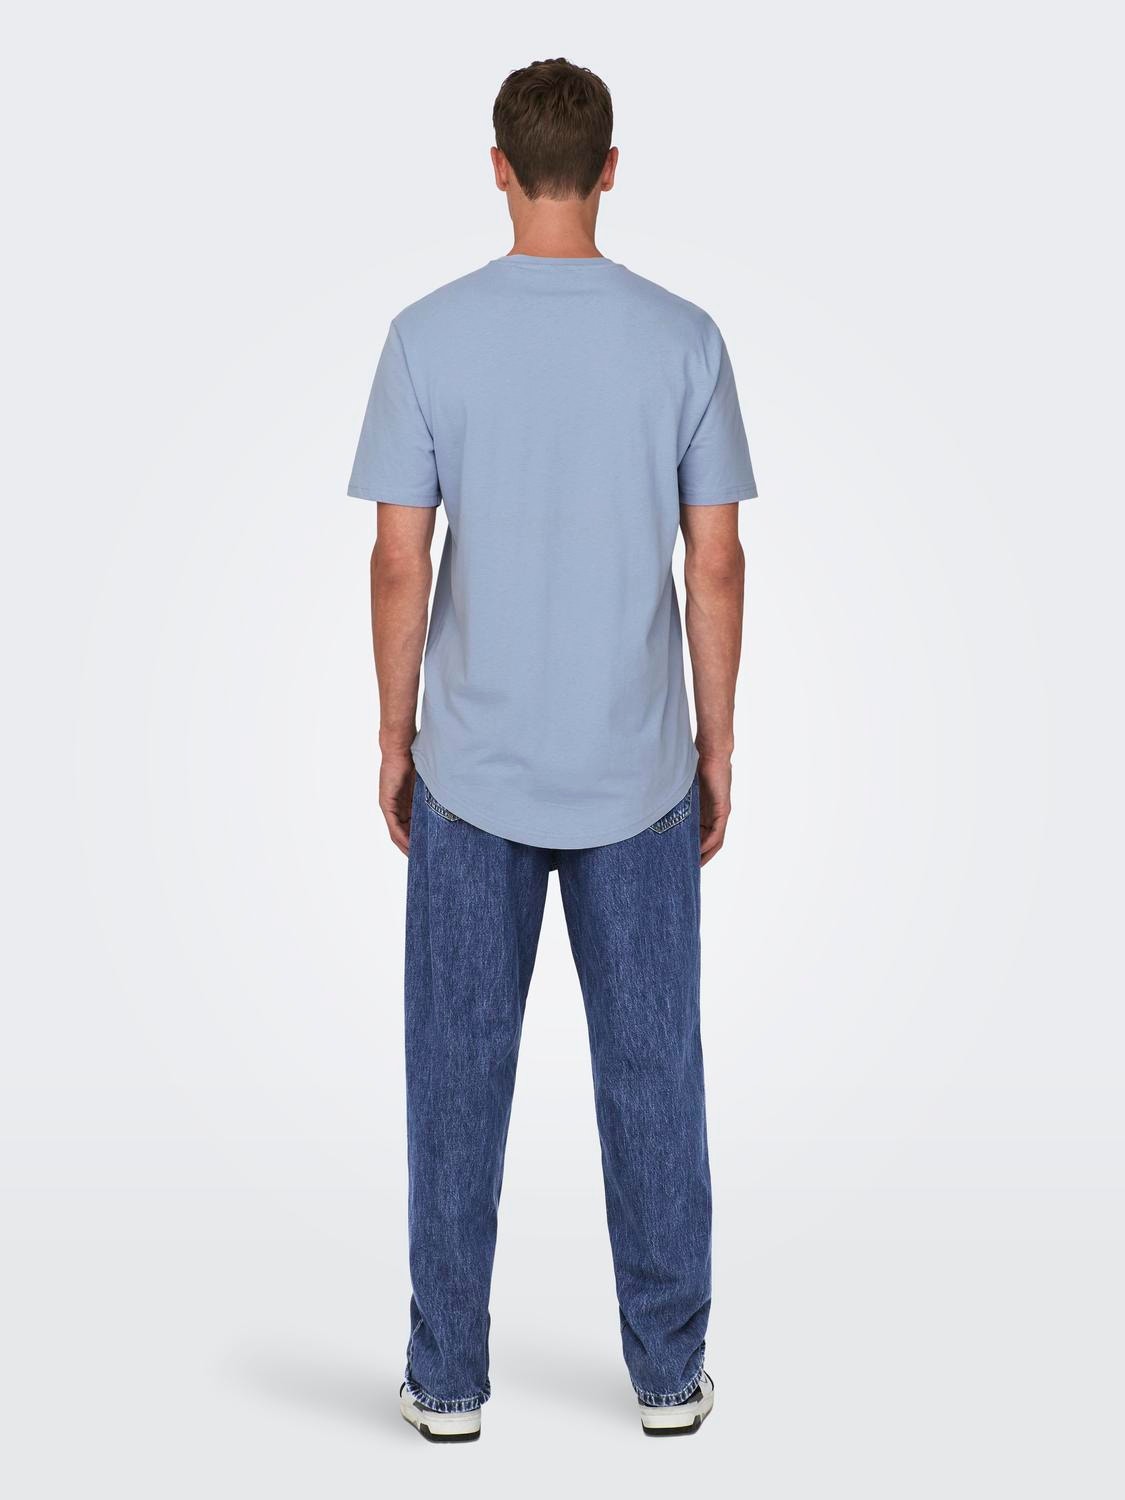 ONLY & SONS Long Line Fit Round Neck T-Shirt -Eventide - 22002973